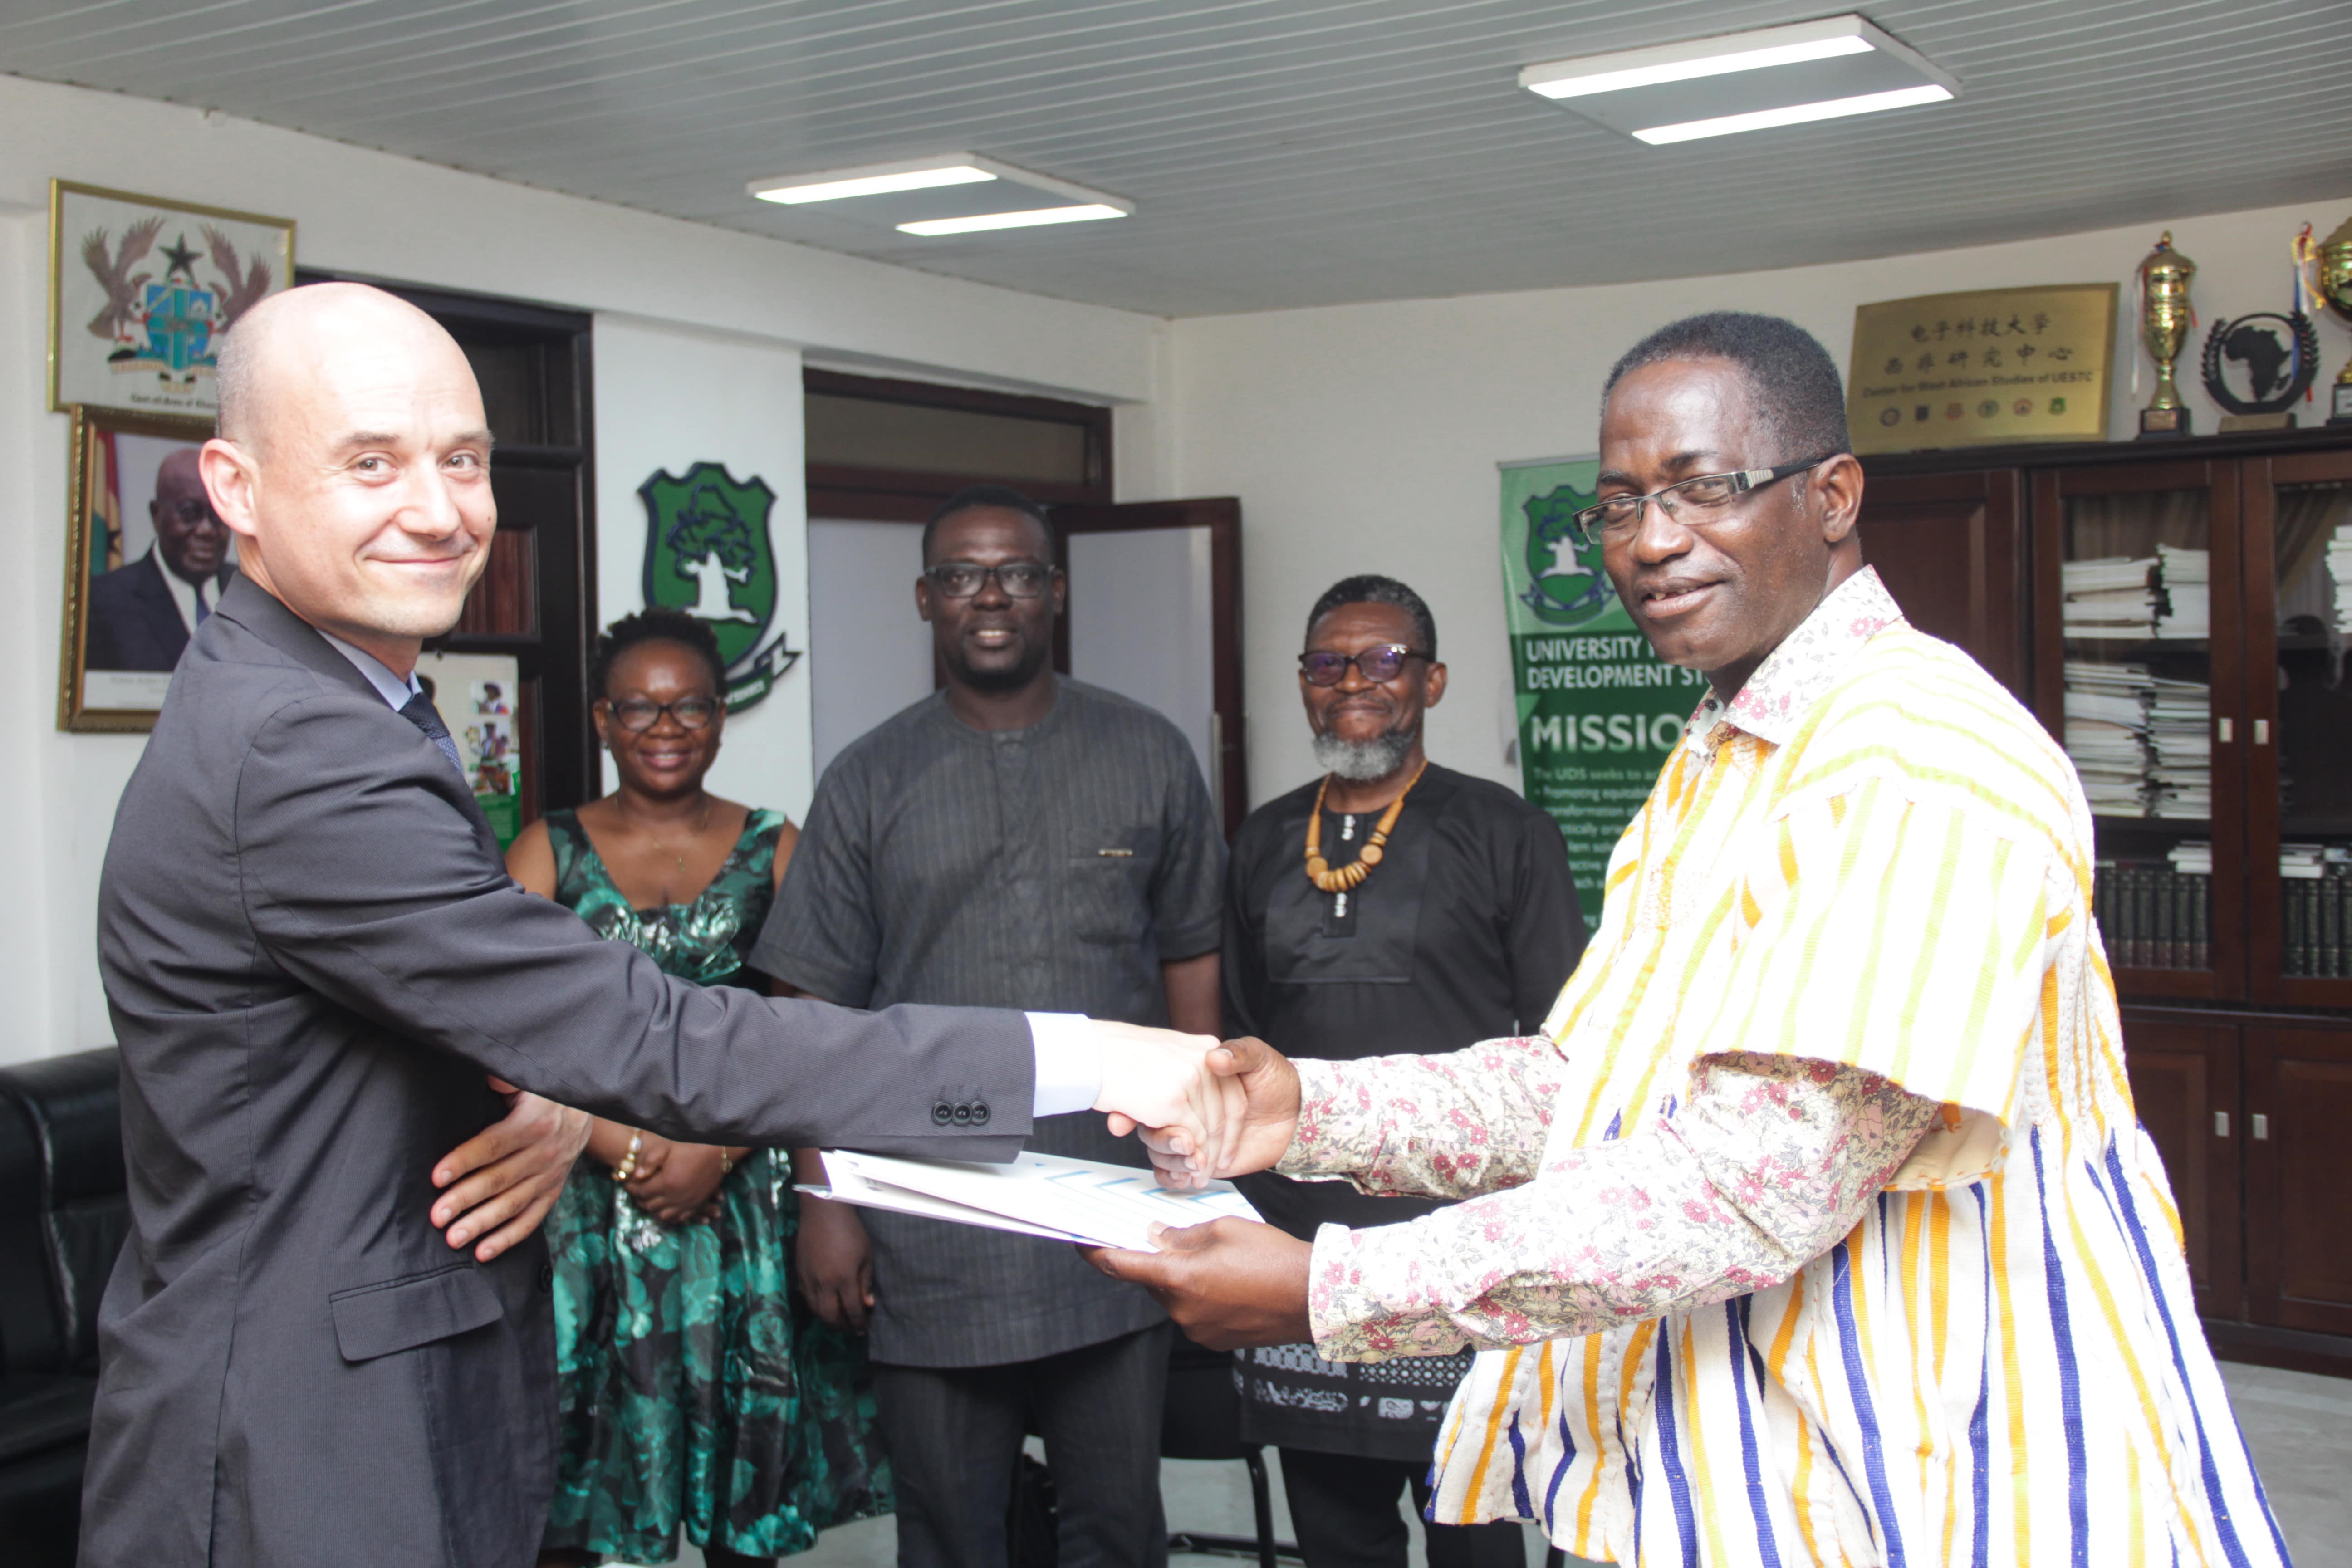 UDS Signs MoU With FH Munster University of Applied Sciences, Germany